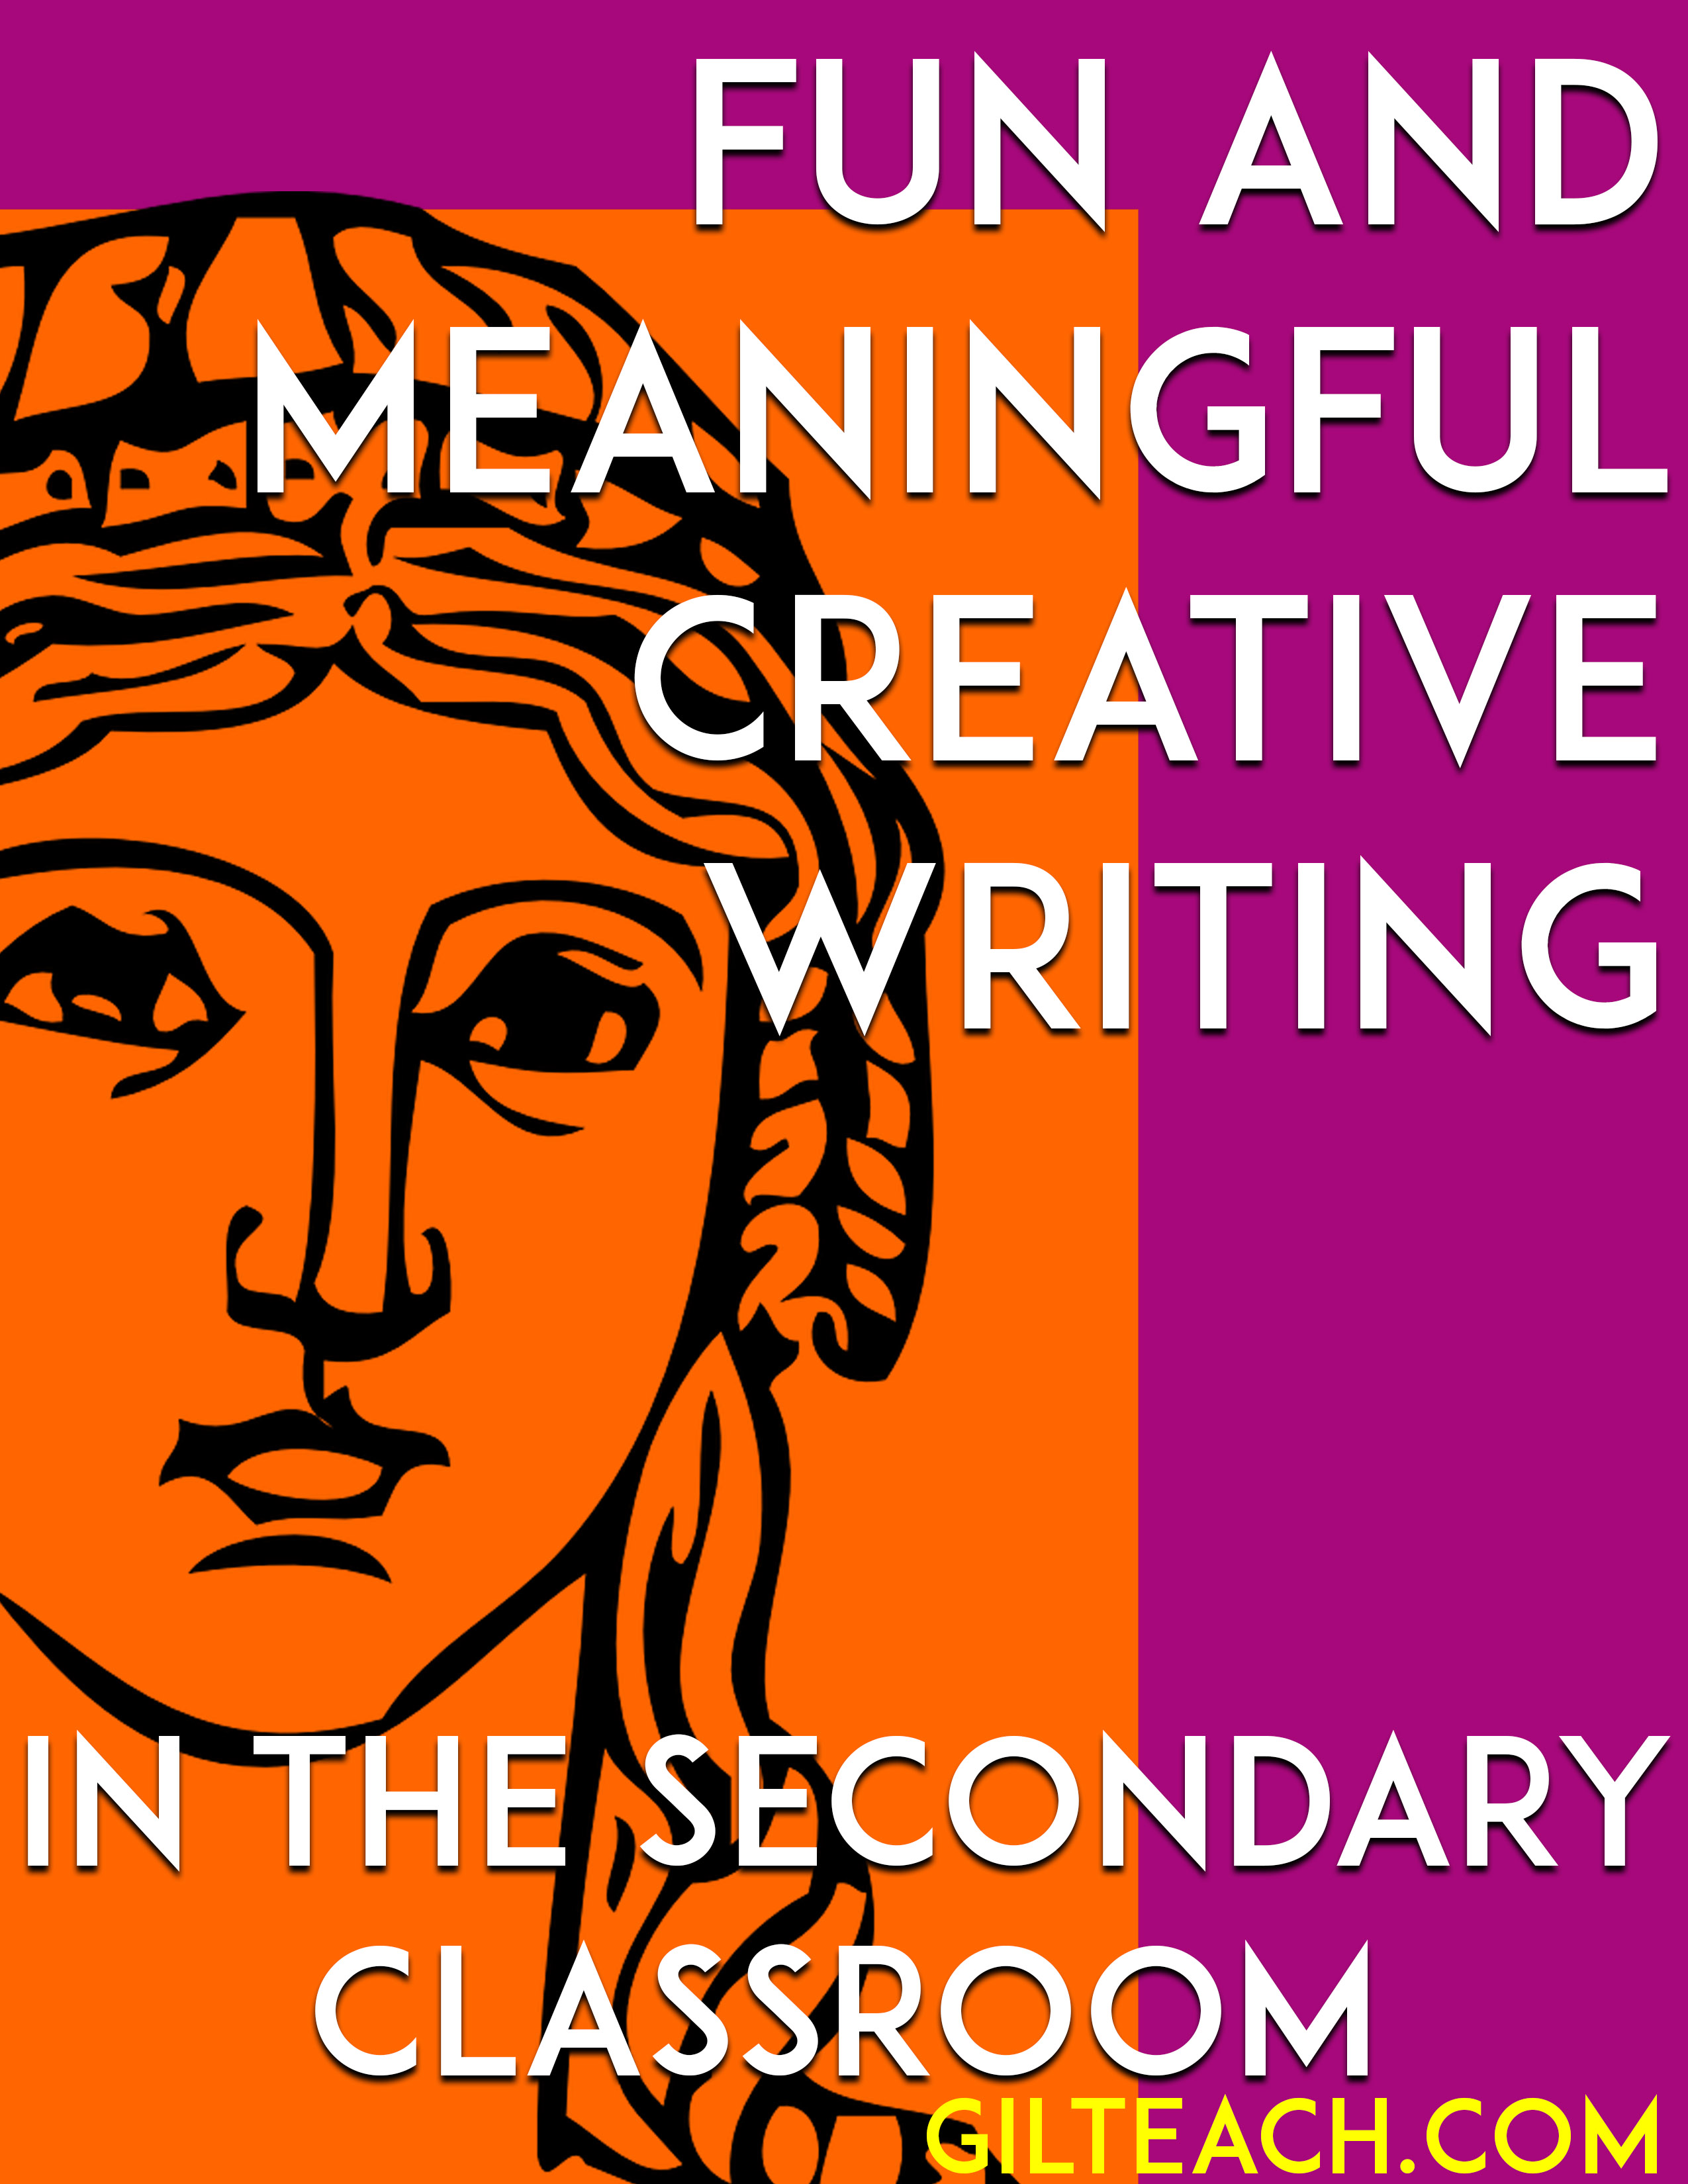 5 ideas for fun and meaningful creative writing in the secondary classroom